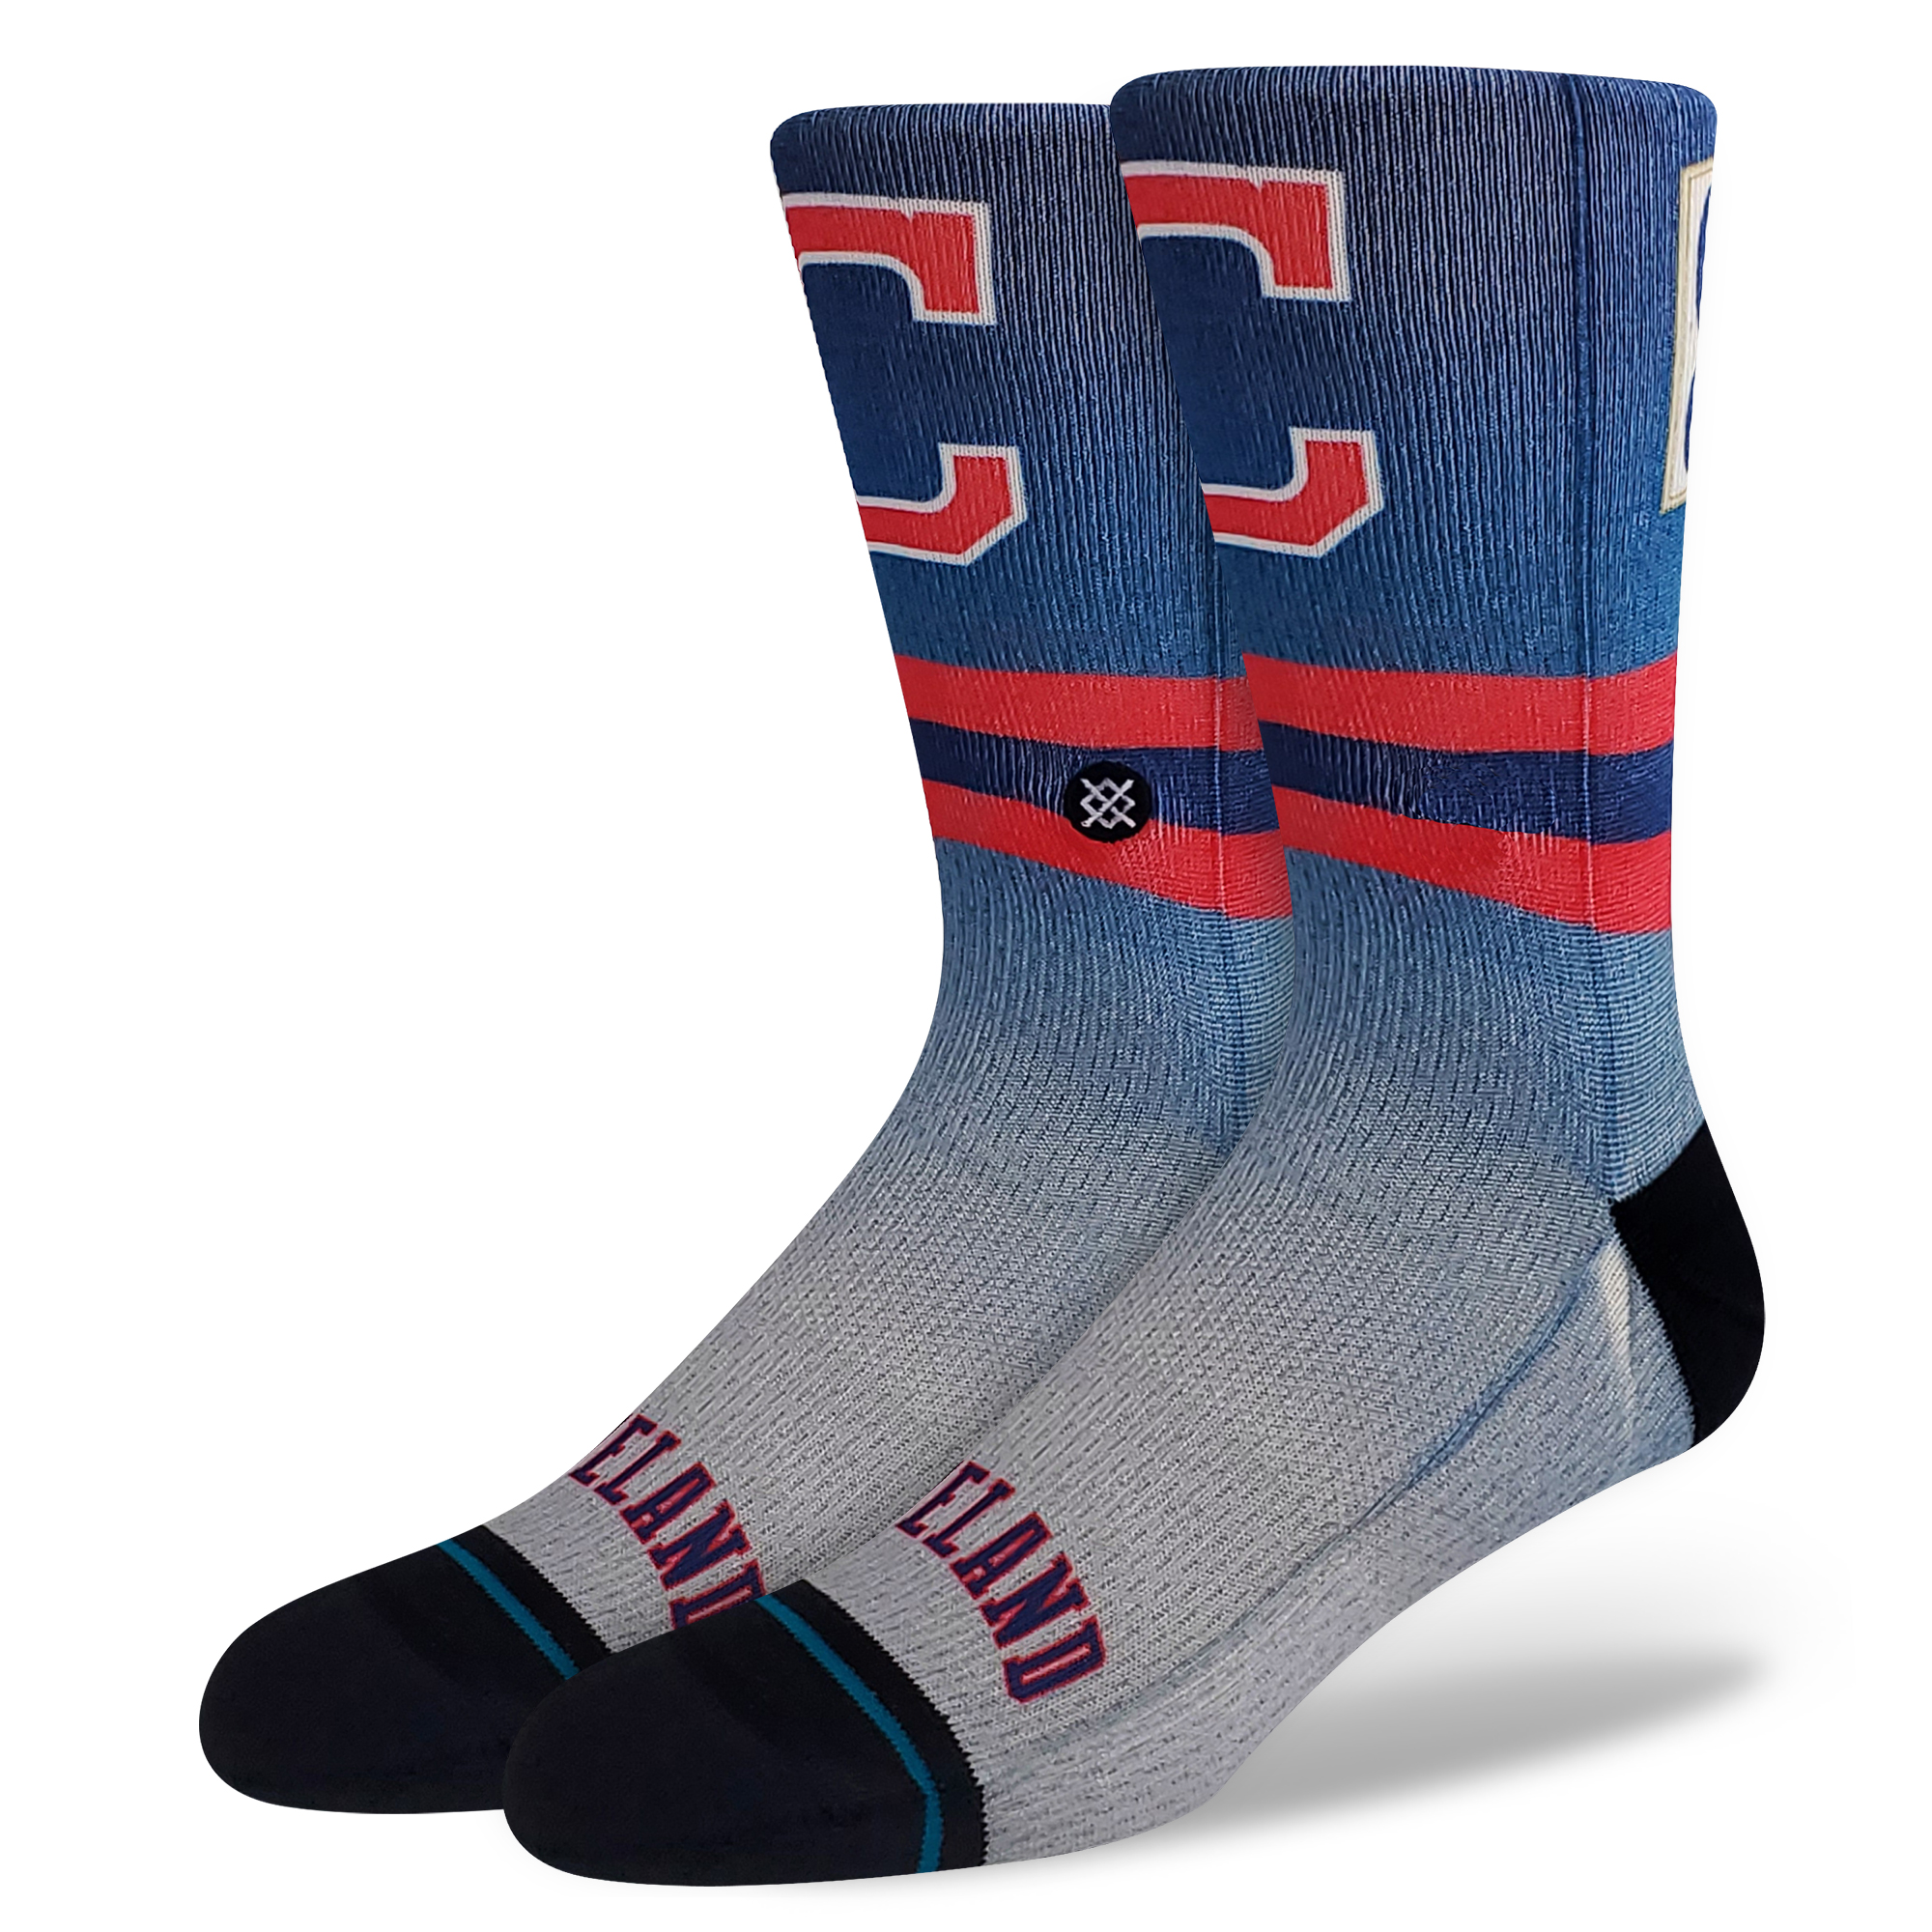 MLB X Stance Cooperstown Collection Poly Crew Socks | Stance